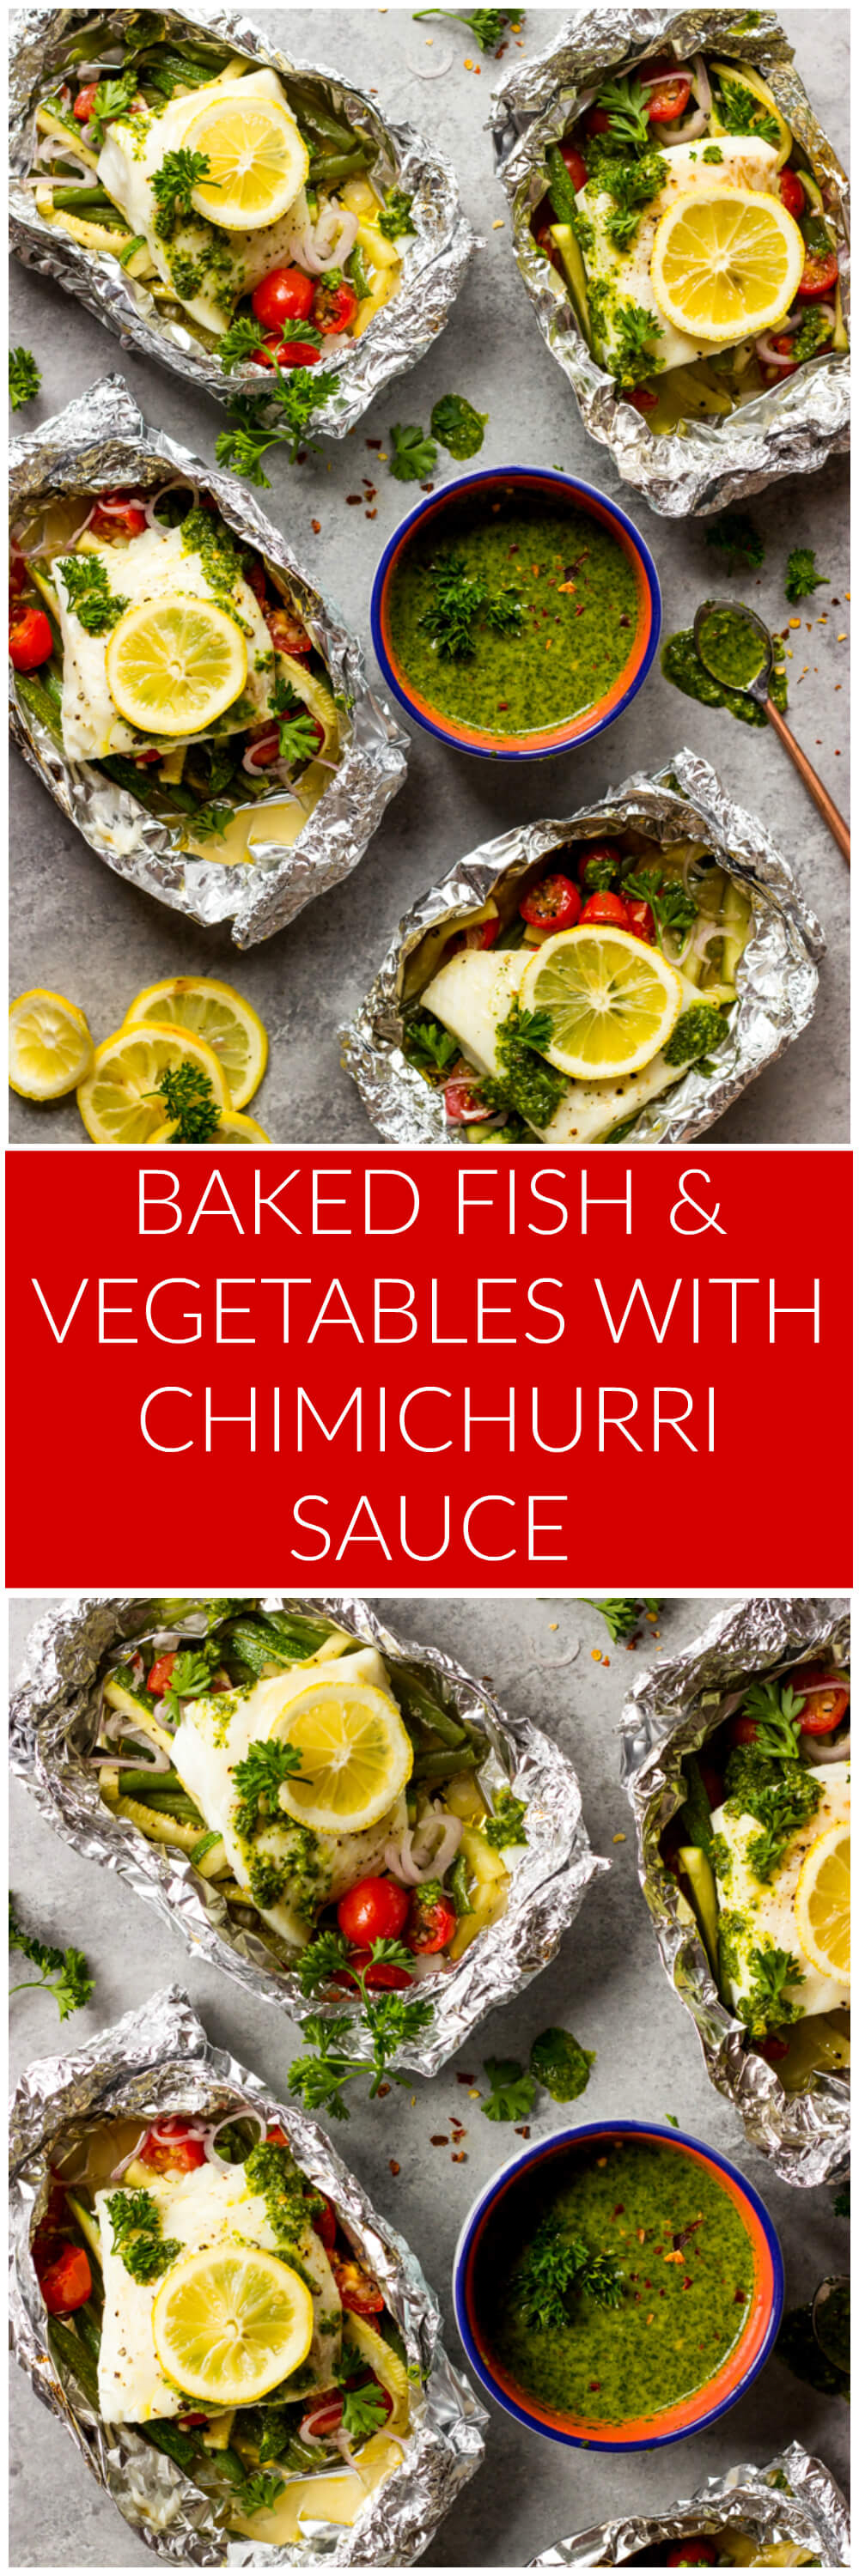 Baked Fish and Vegetables in Foil with Chimichurri Sauce - white fish baked in foil with green beans, zucchini, tomatoes, then served with chimichurri sauce | littlebroken.com @littlebroken